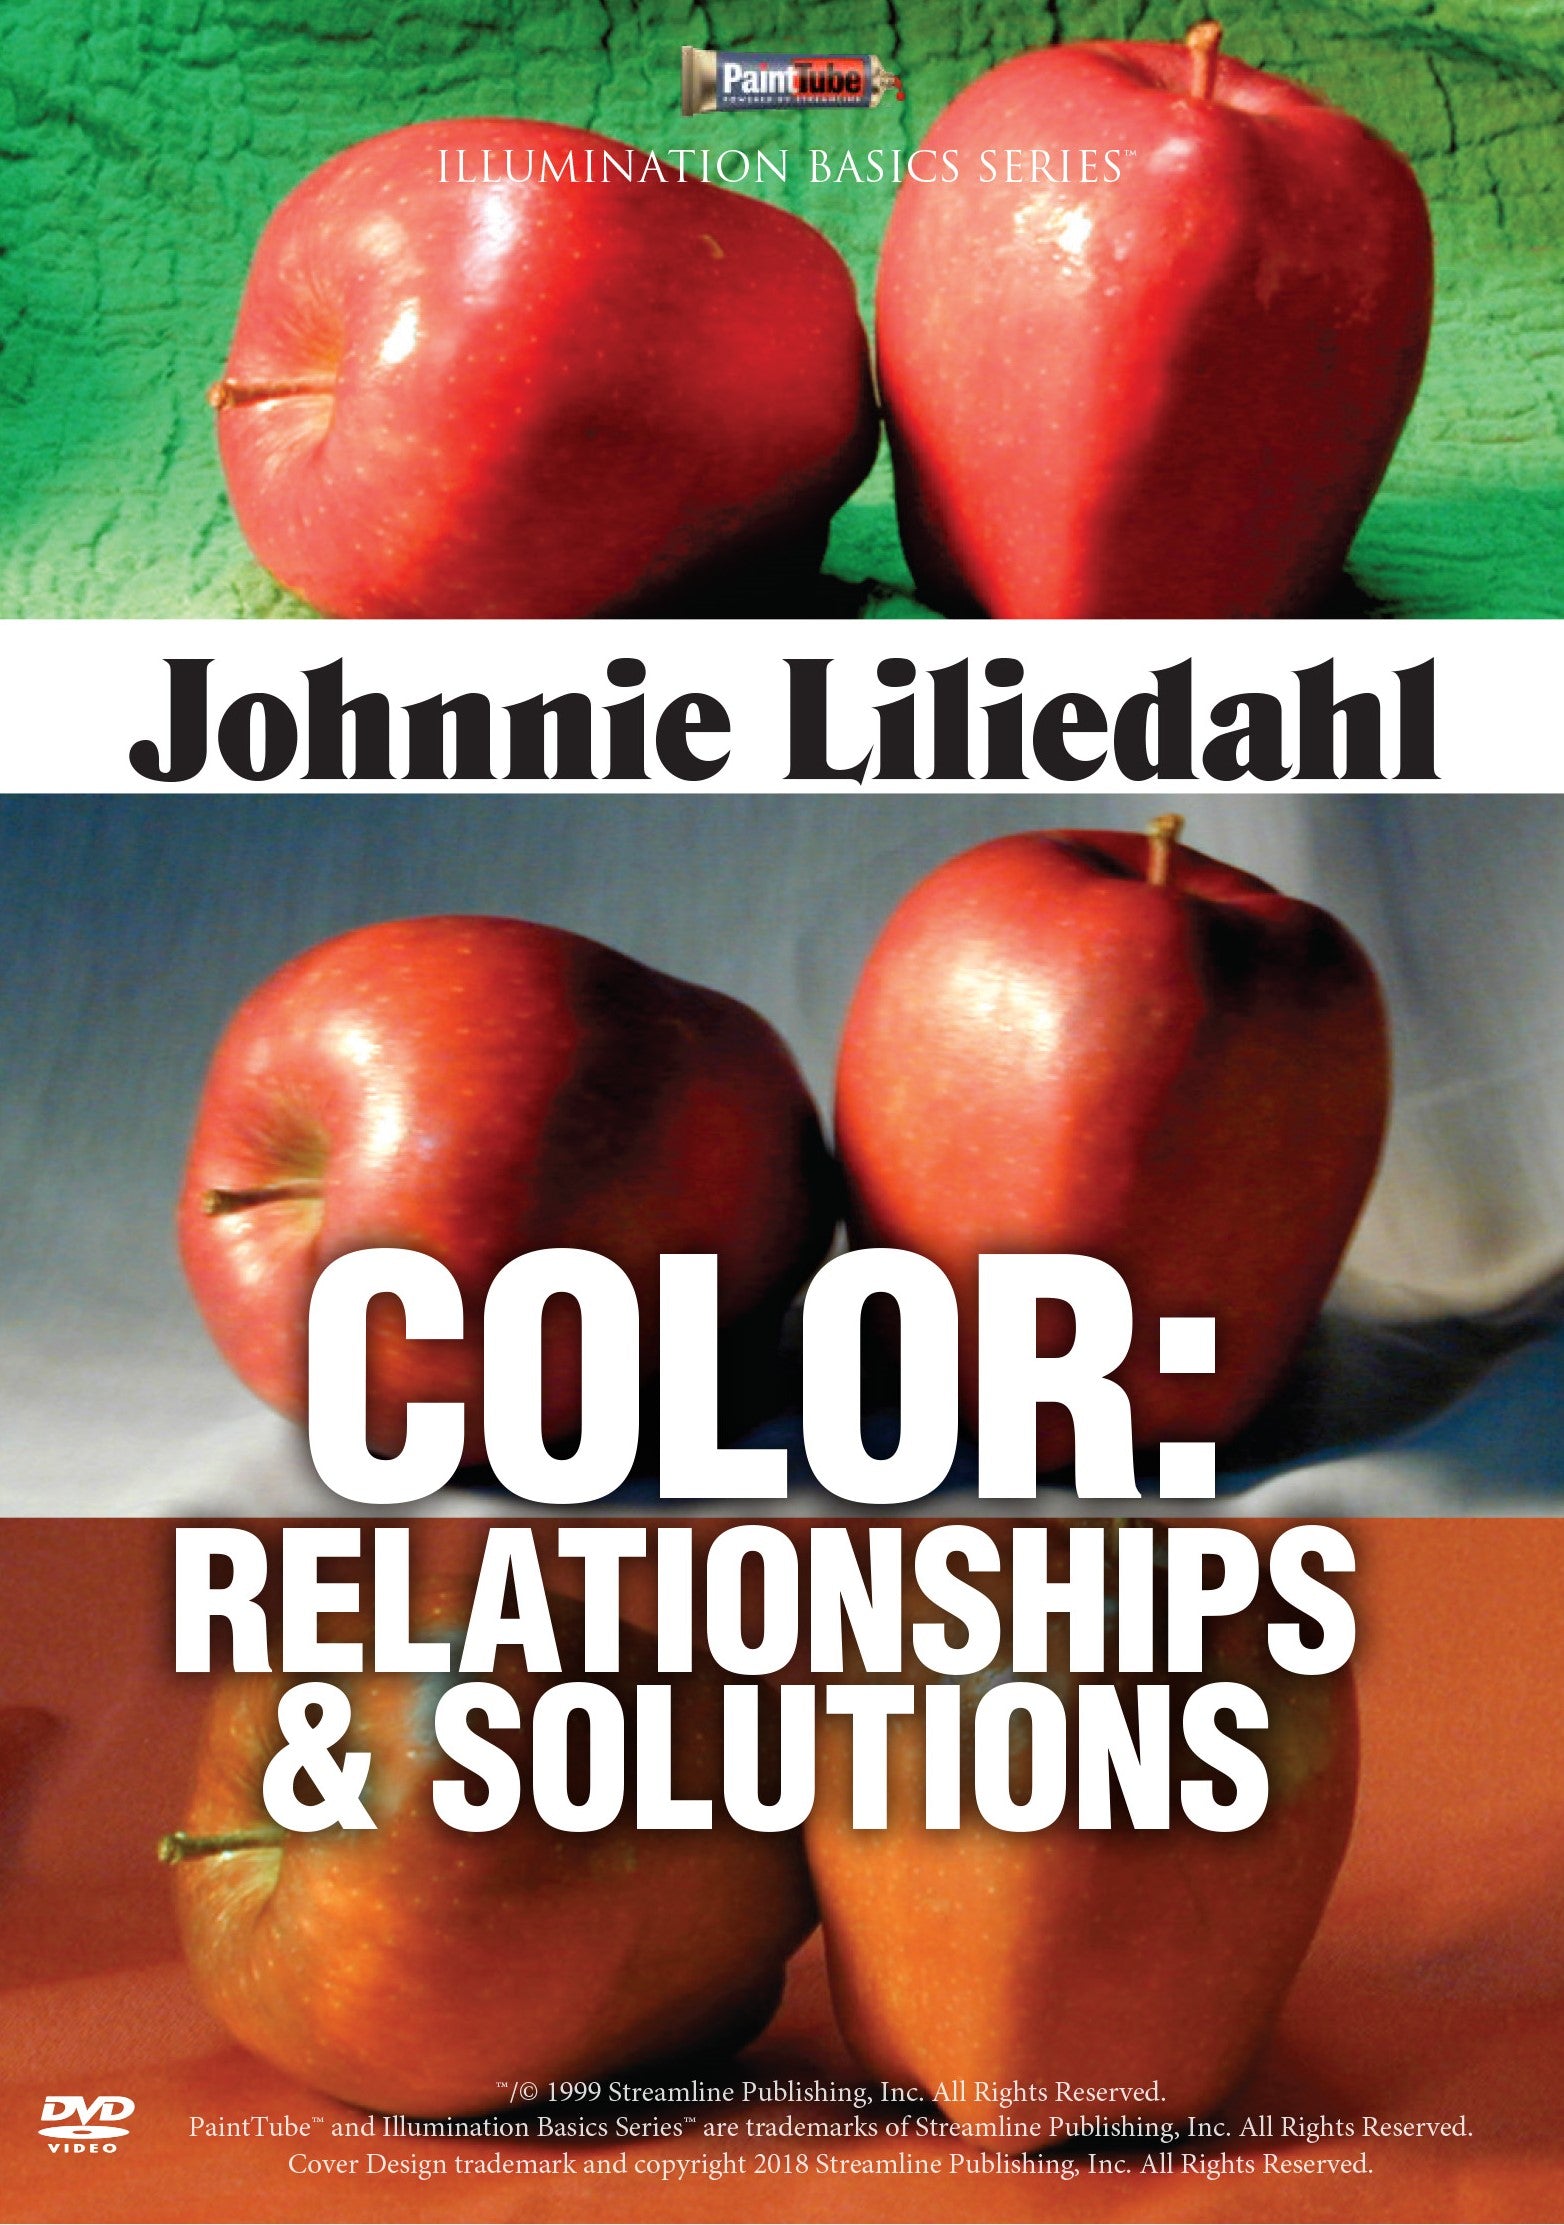 Johnnie Liliedahl: Color Solutions